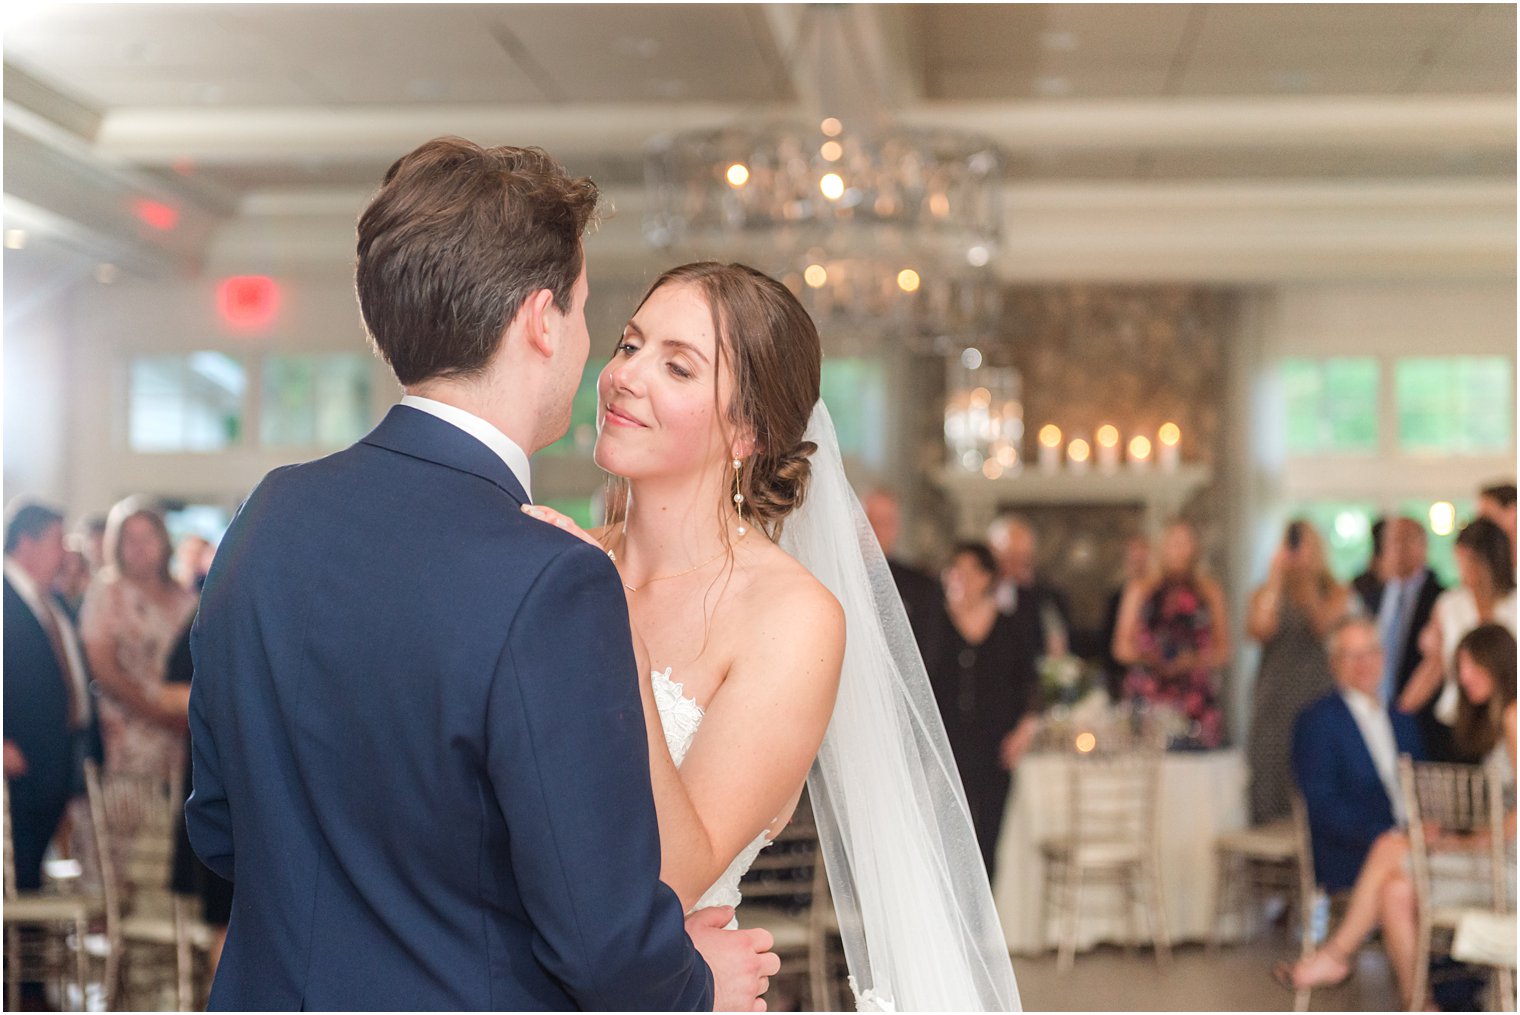 bride smiles at groom during reception in ballroom